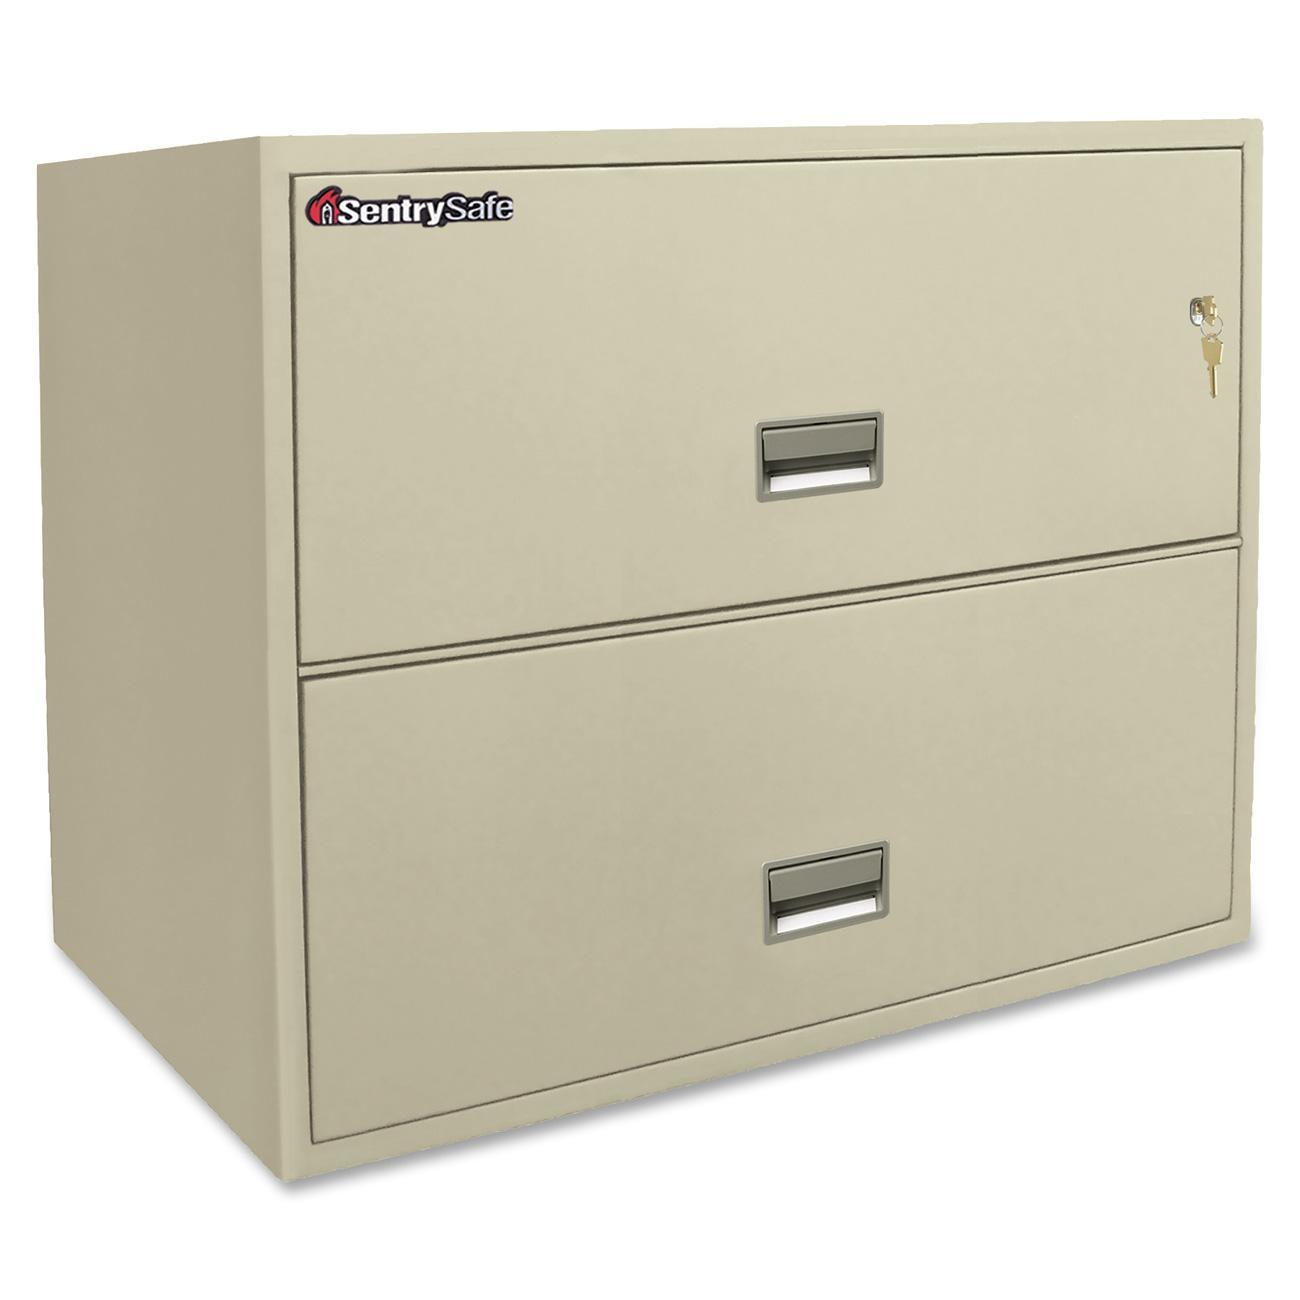 Sentry Safe 2l3610p Lateral Fire File Cabinet Sen2l3610p with size 1300 X 1300